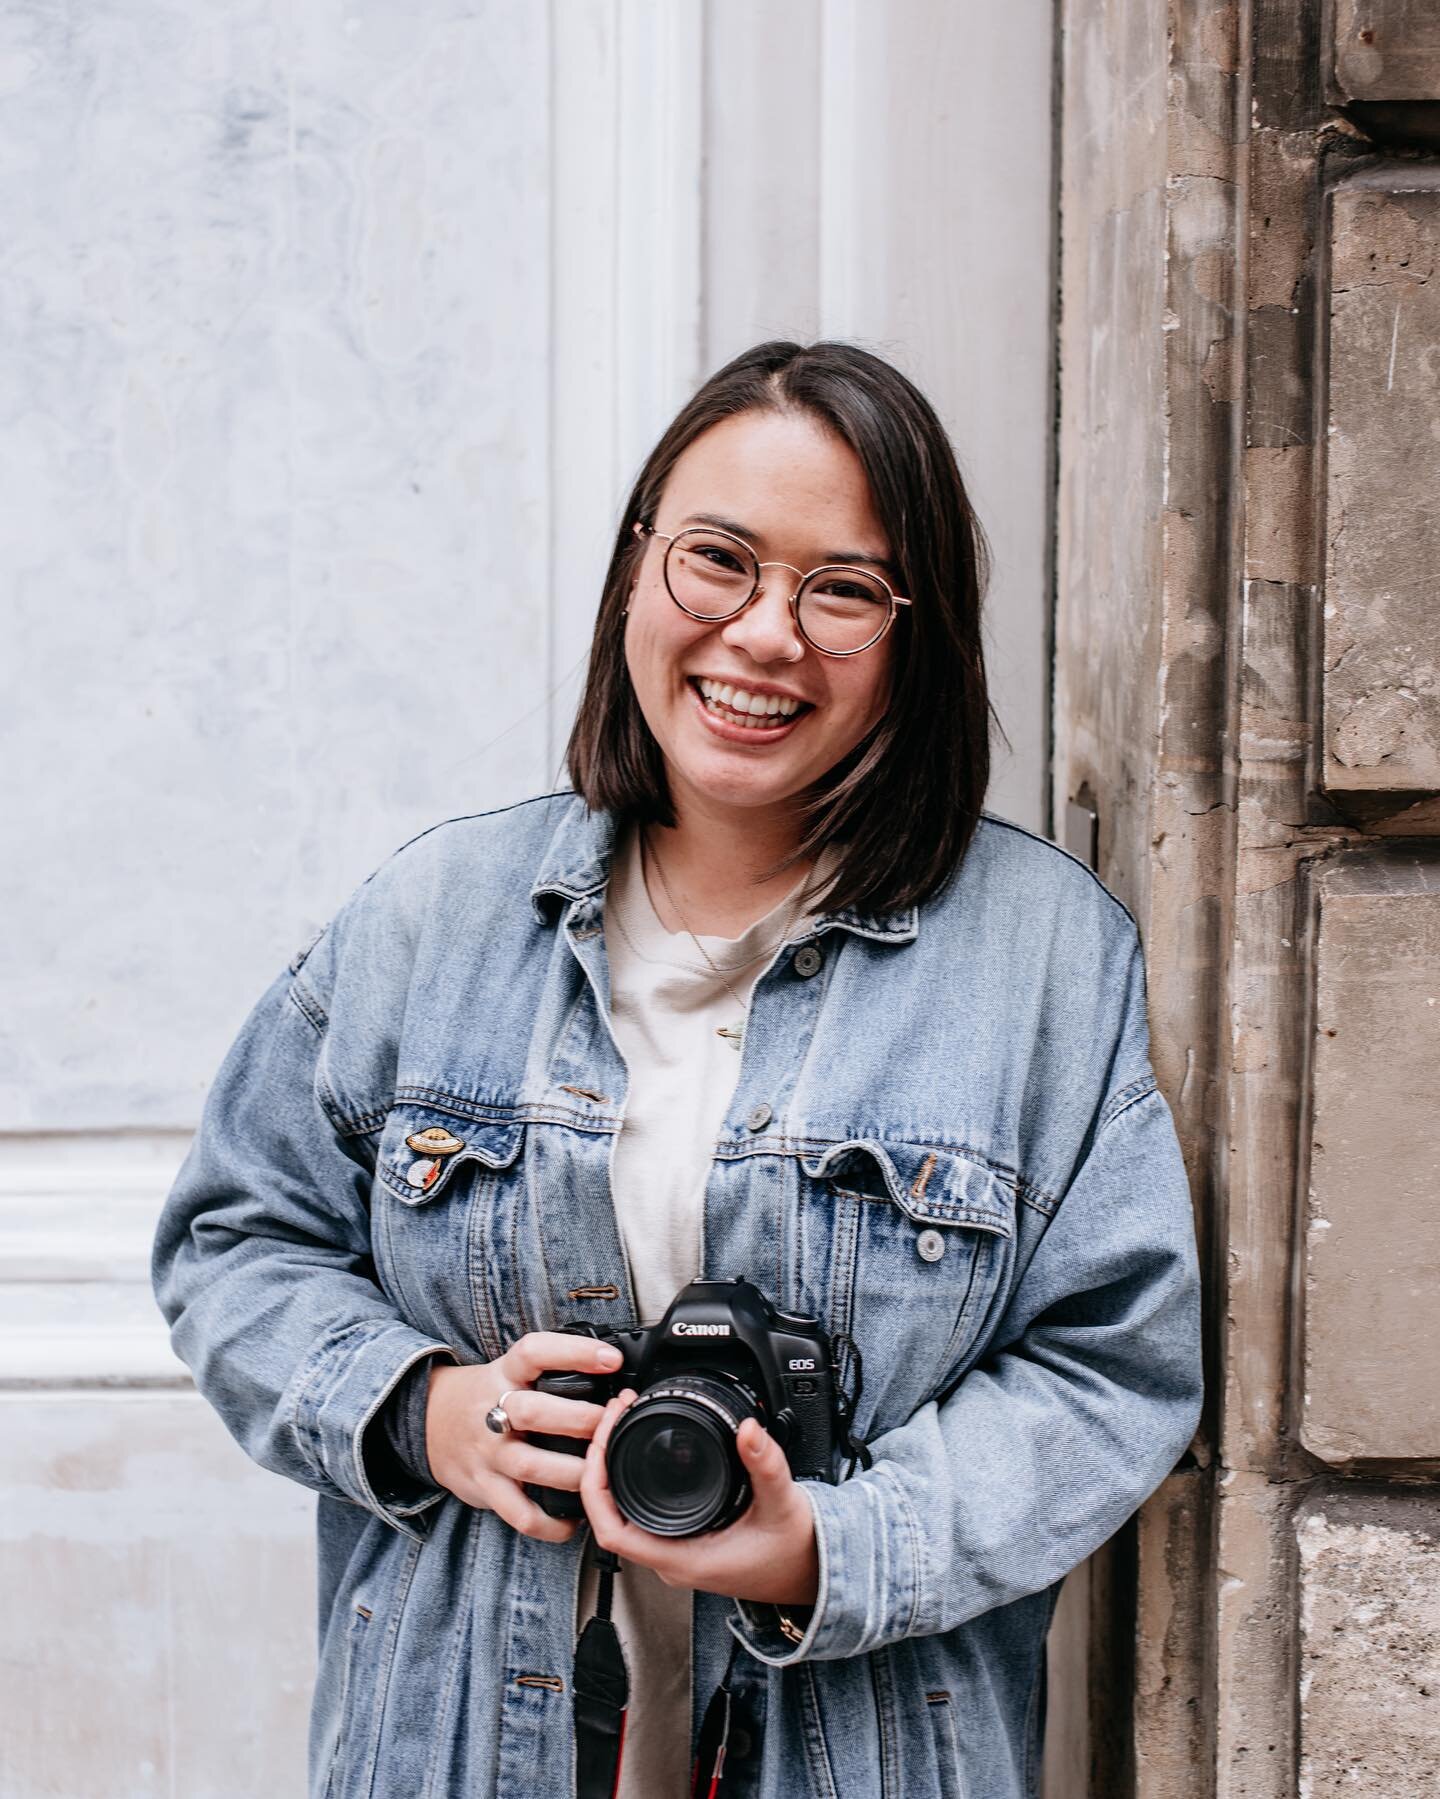 Hey, it&rsquo;s Katrina! One of our photographers at MPP 

Wanna get to know Katrina better? Scroll on down for some fun ol&rsquo; facts! 

&ldquo;Half Aussie, half Malaysian, living the dream in Paris after coming for one year just to explore an